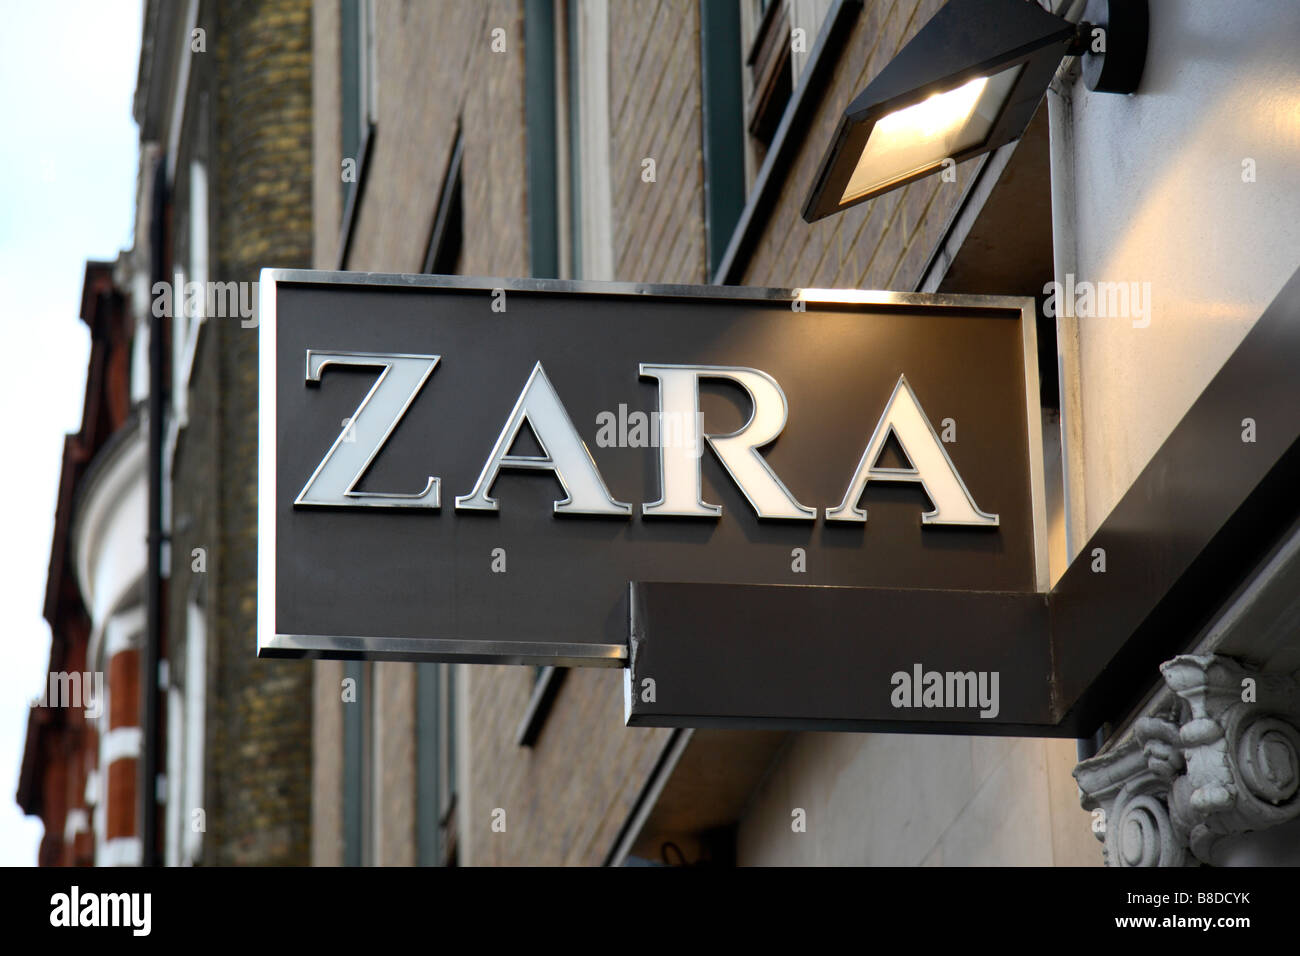 Zara Sign High Resolution Stock Photography and Images - Alamy